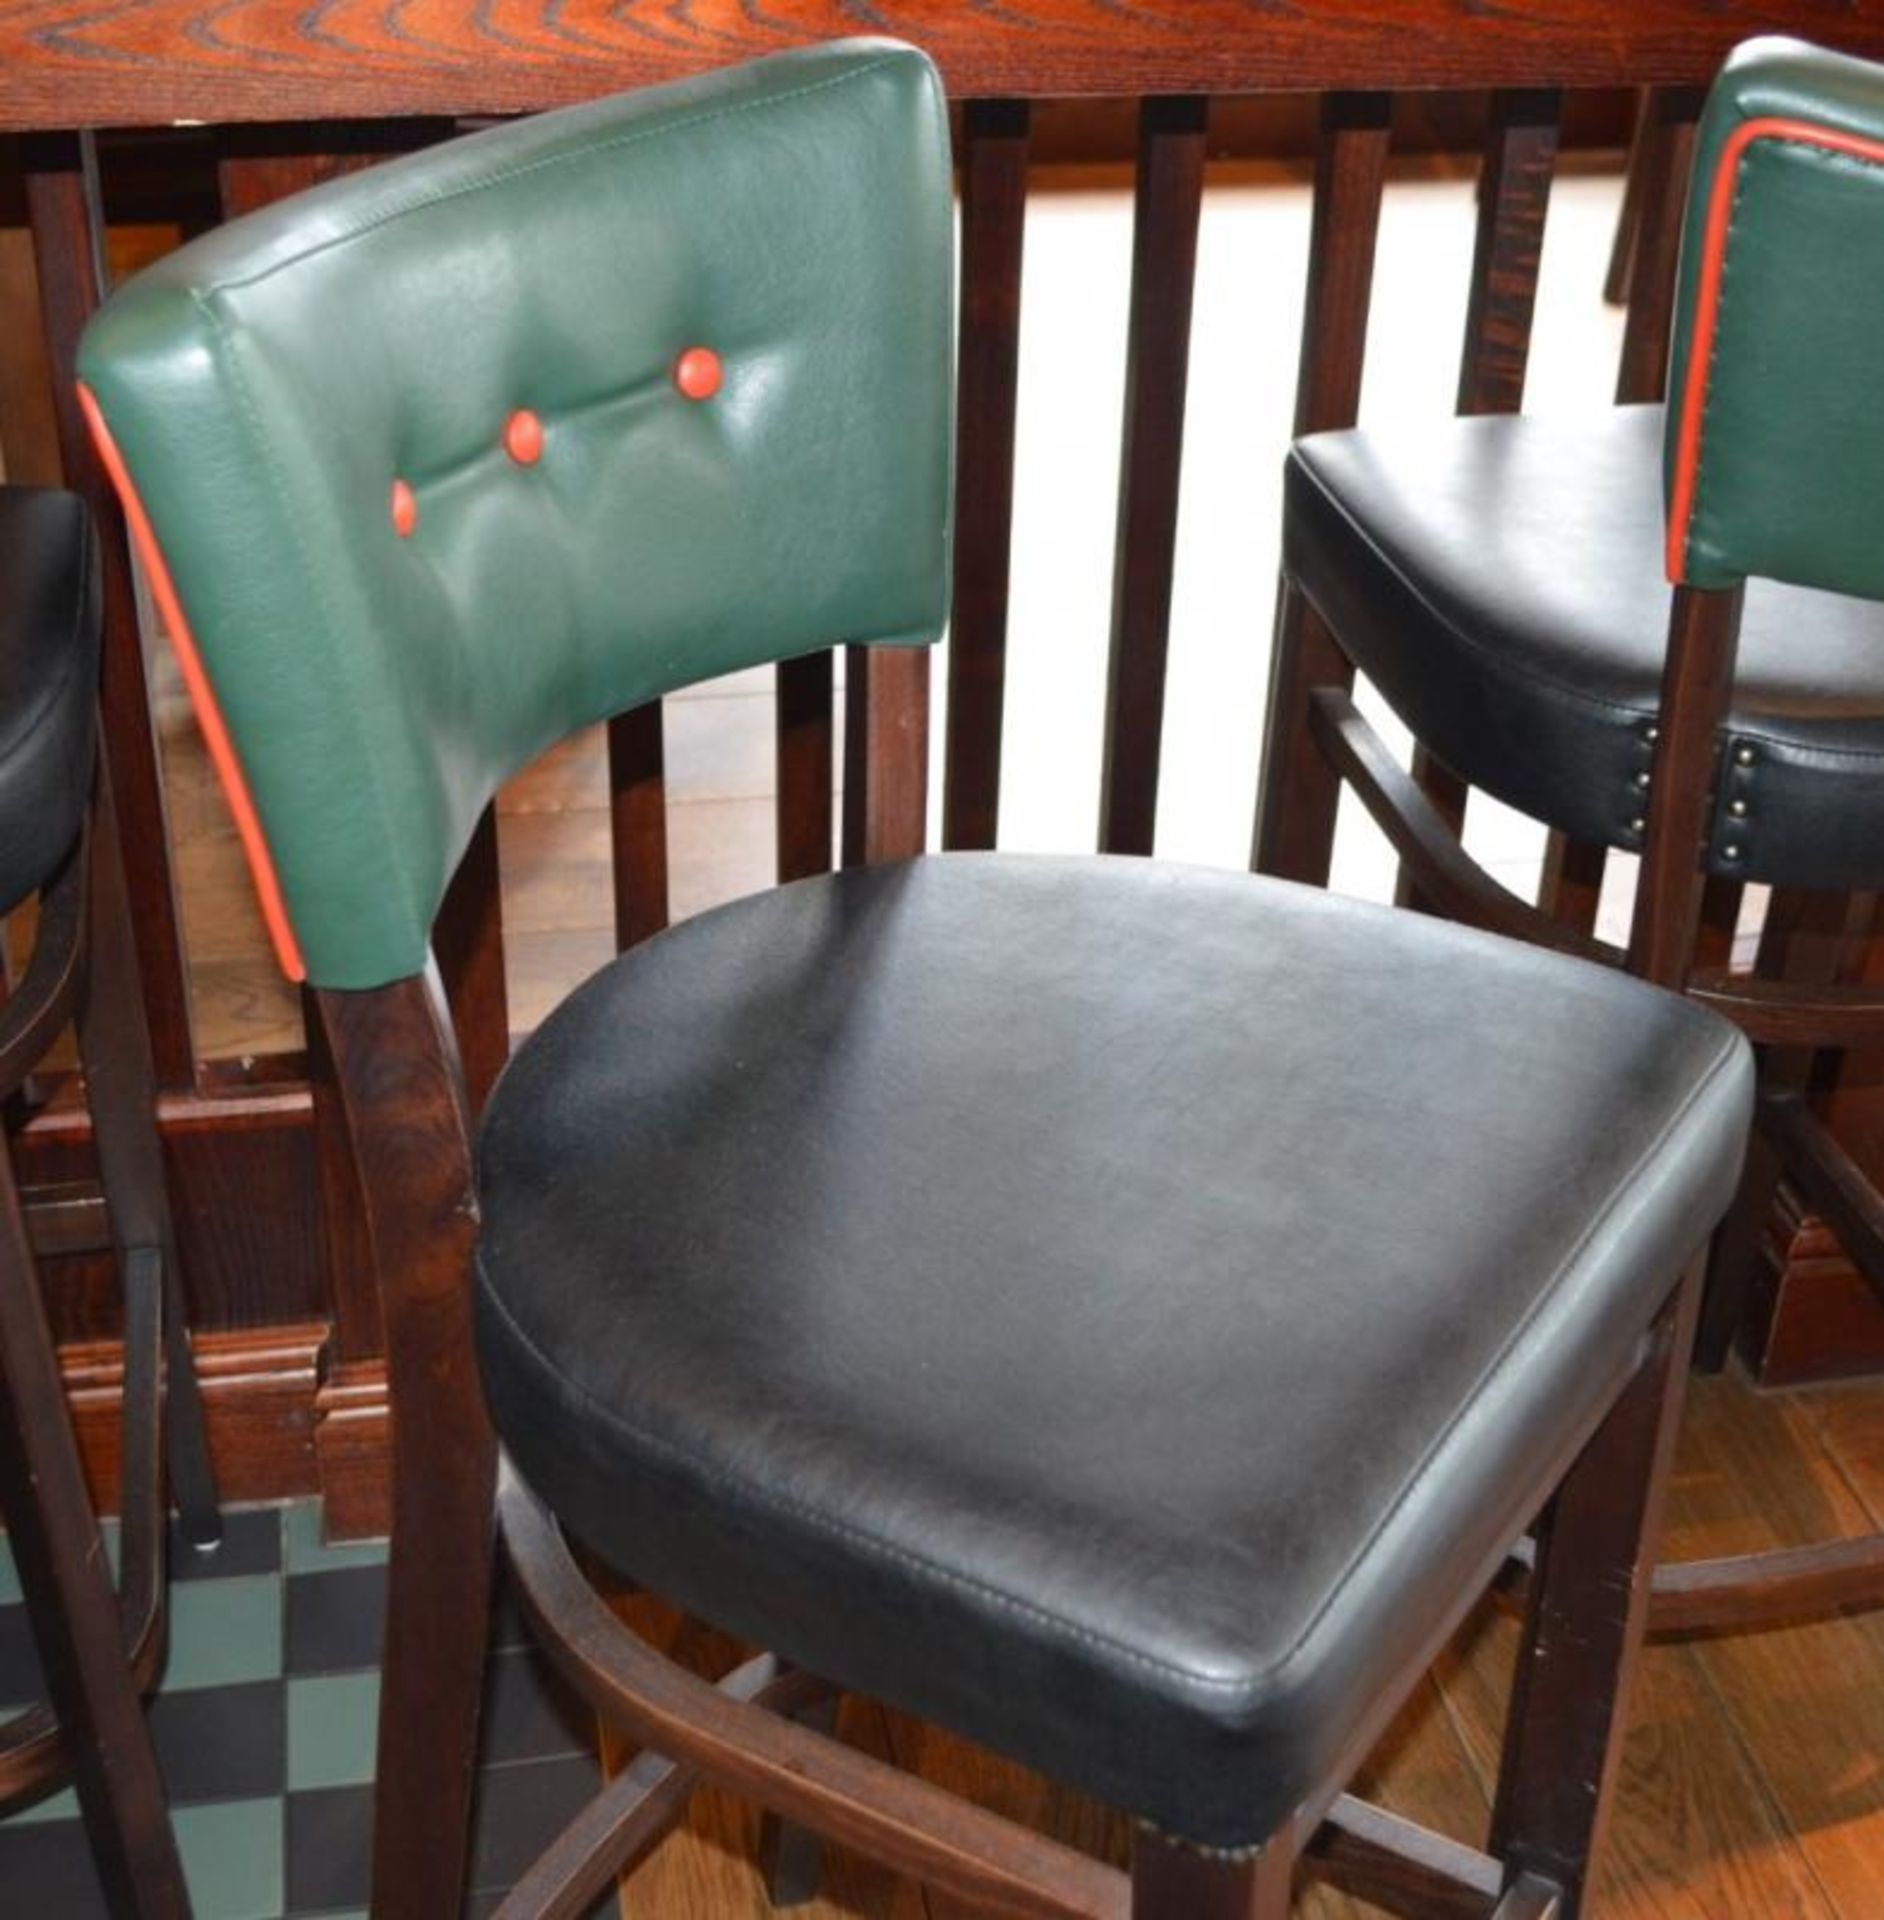 3 x Contemporary Button Back Restaurant Bar Stools - Upholstered in Green & Black Faux Leather - Image 2 of 4